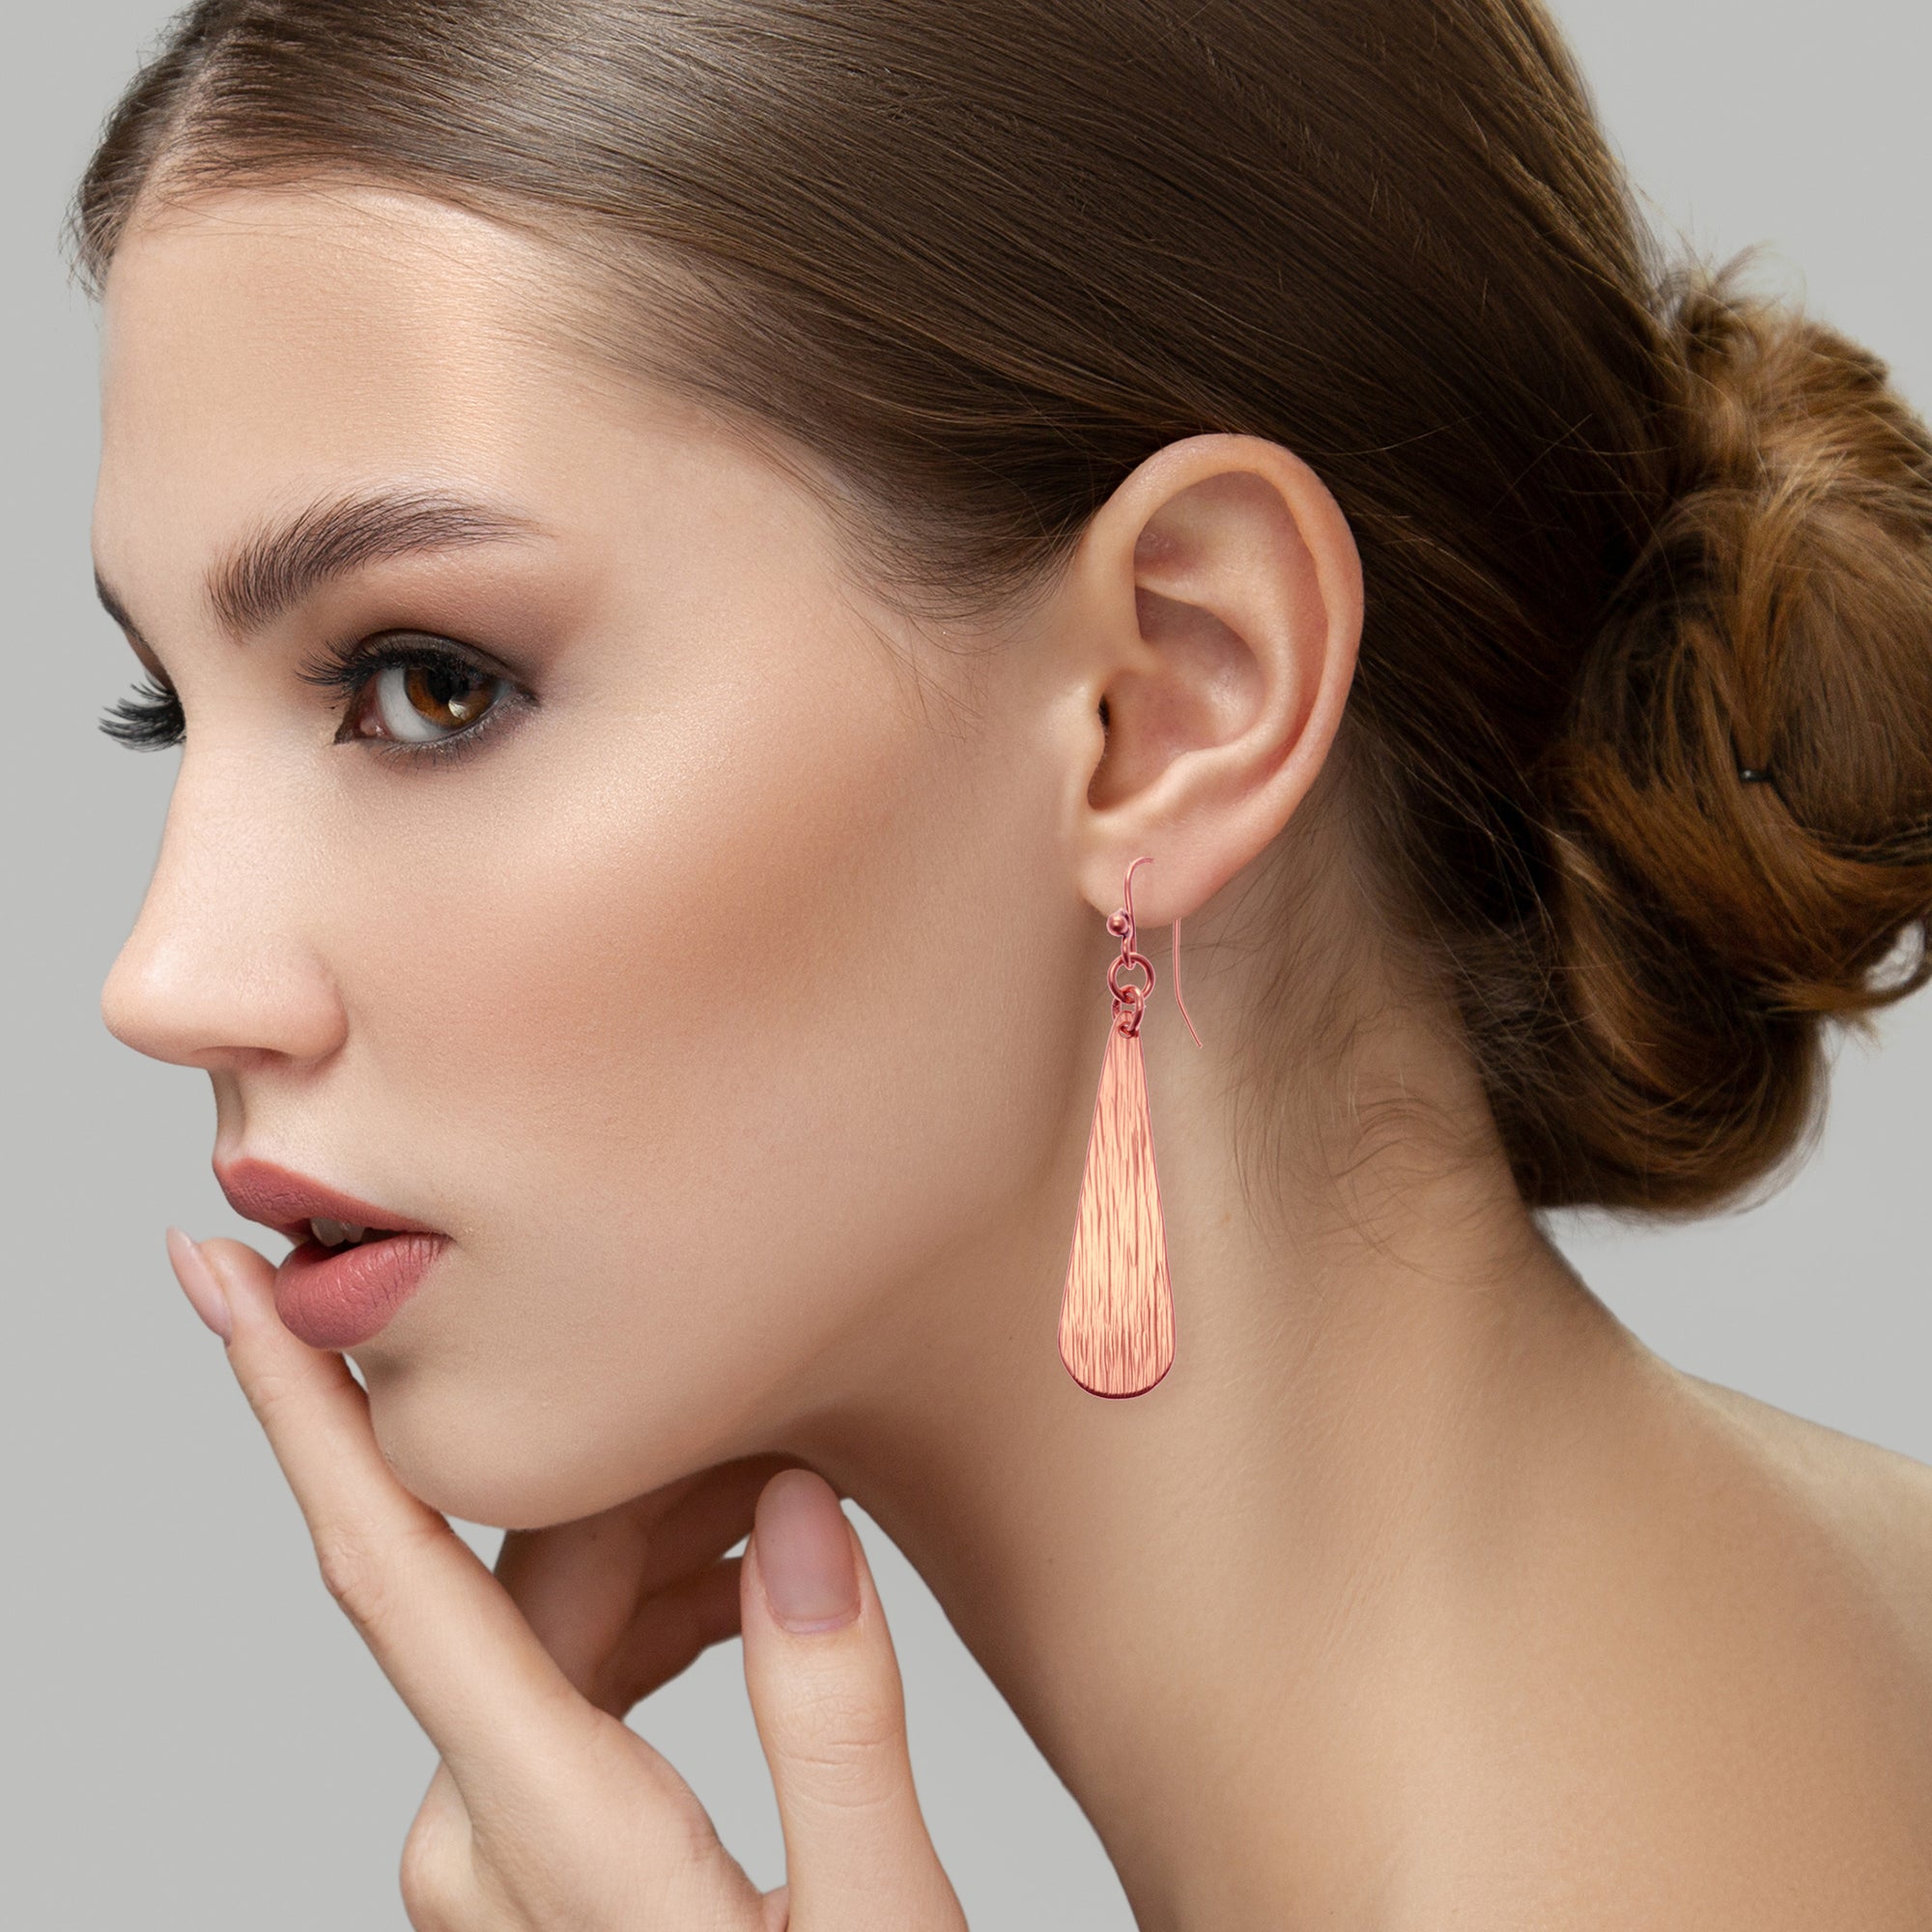 Jewelry Gift Ideas for Oval Shaped Faces